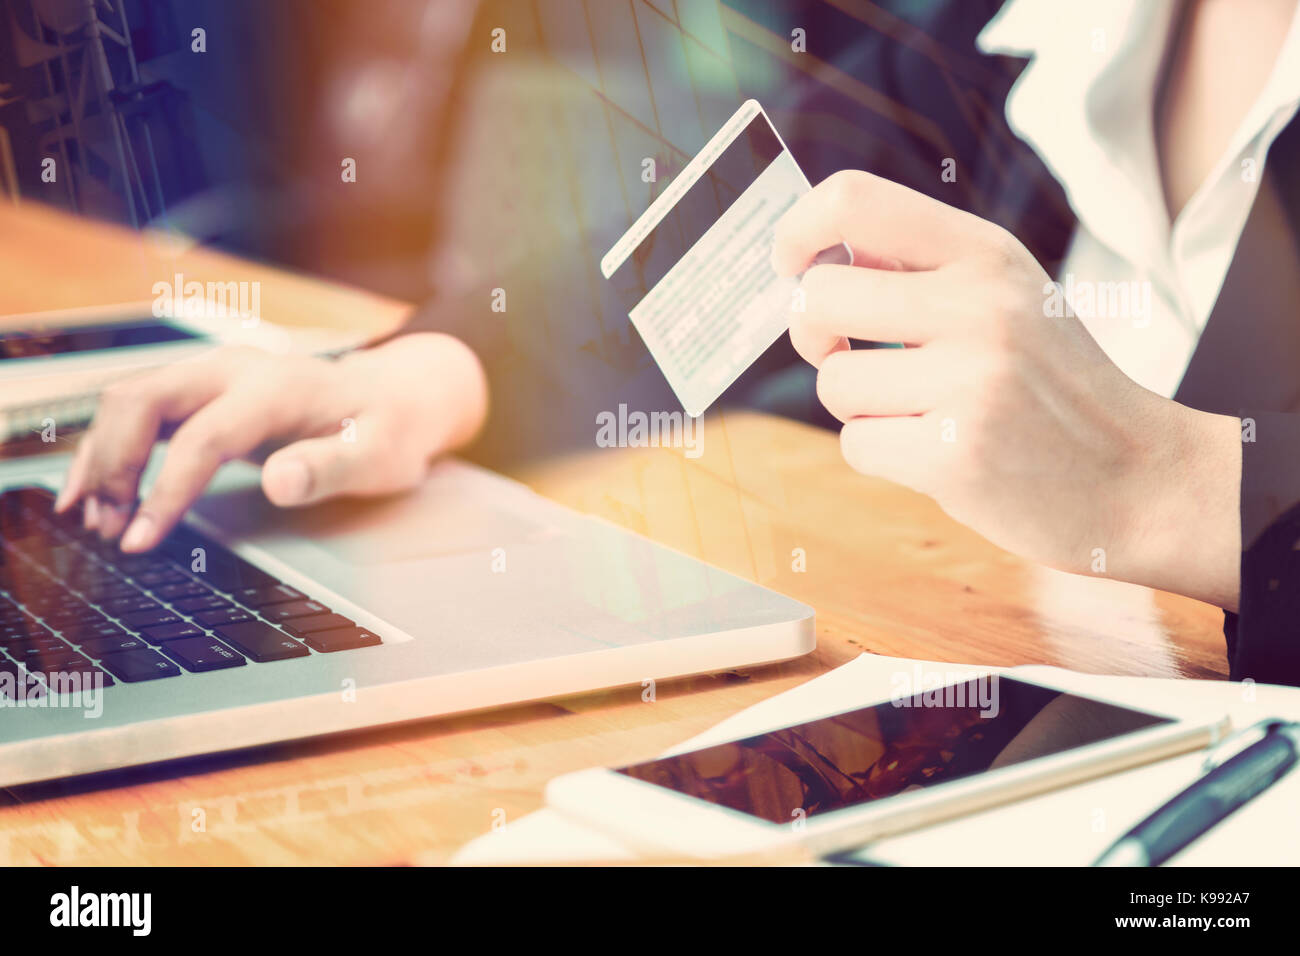 female hand of business woman holding credit card making purchase online with window reflection and lens flare effect, good for business ecommerce con Stock Photo